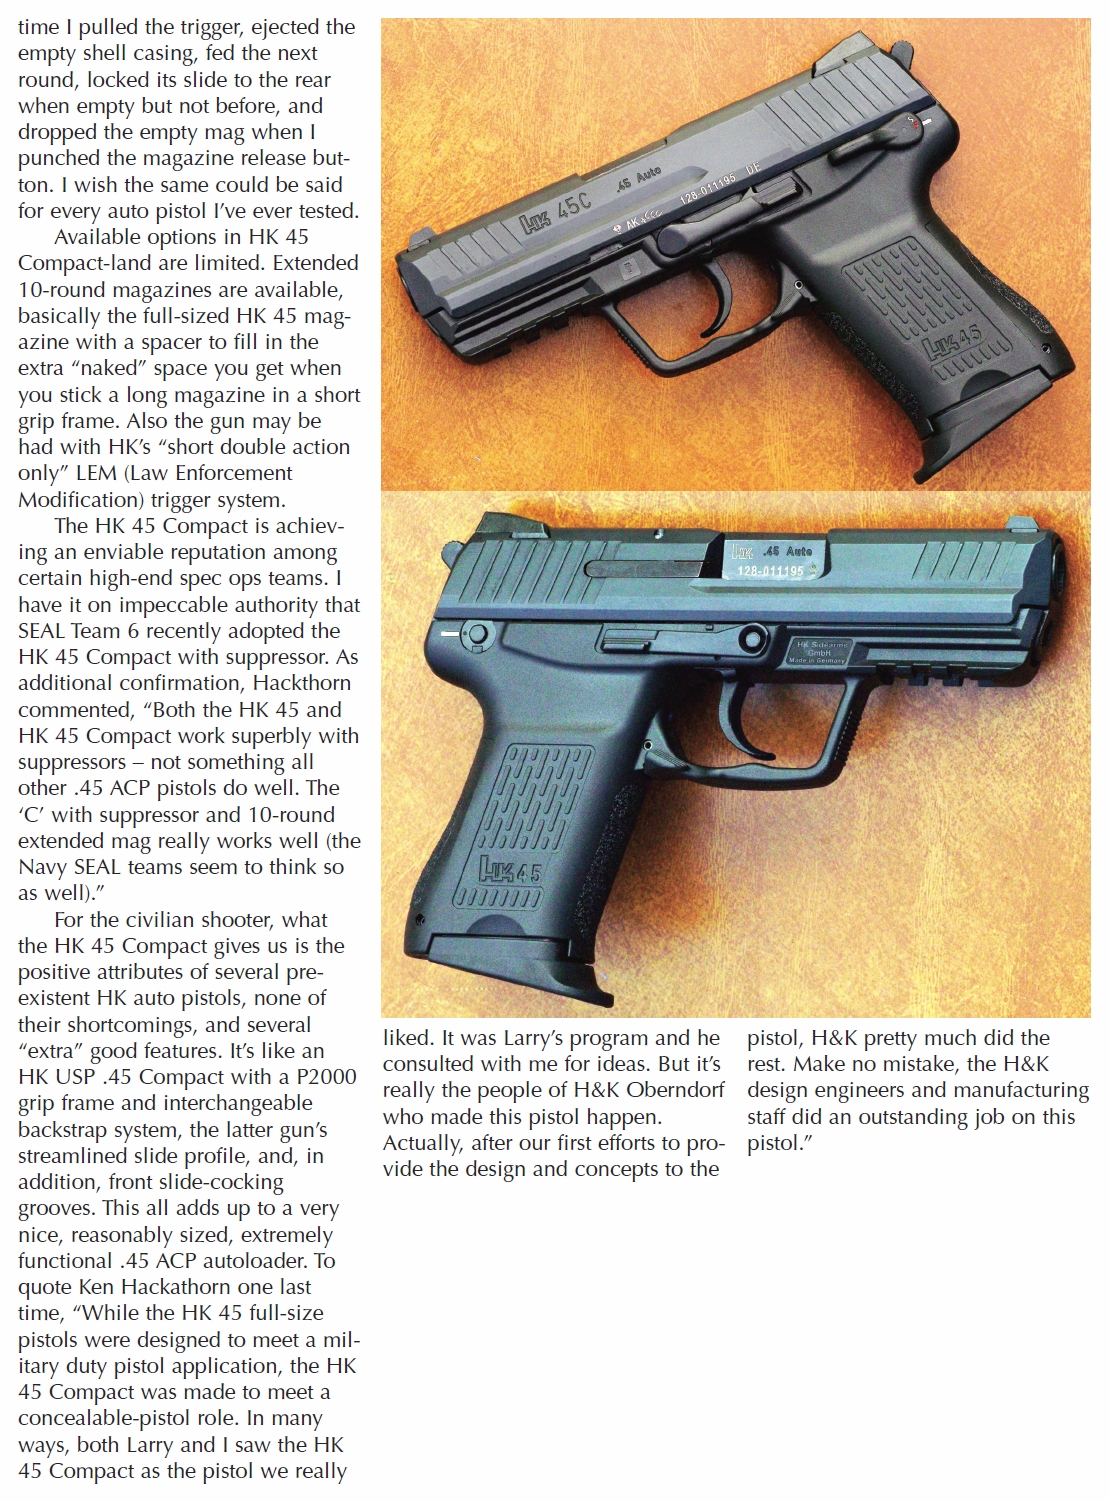 Heckler and Koch's 45 Compact page 8